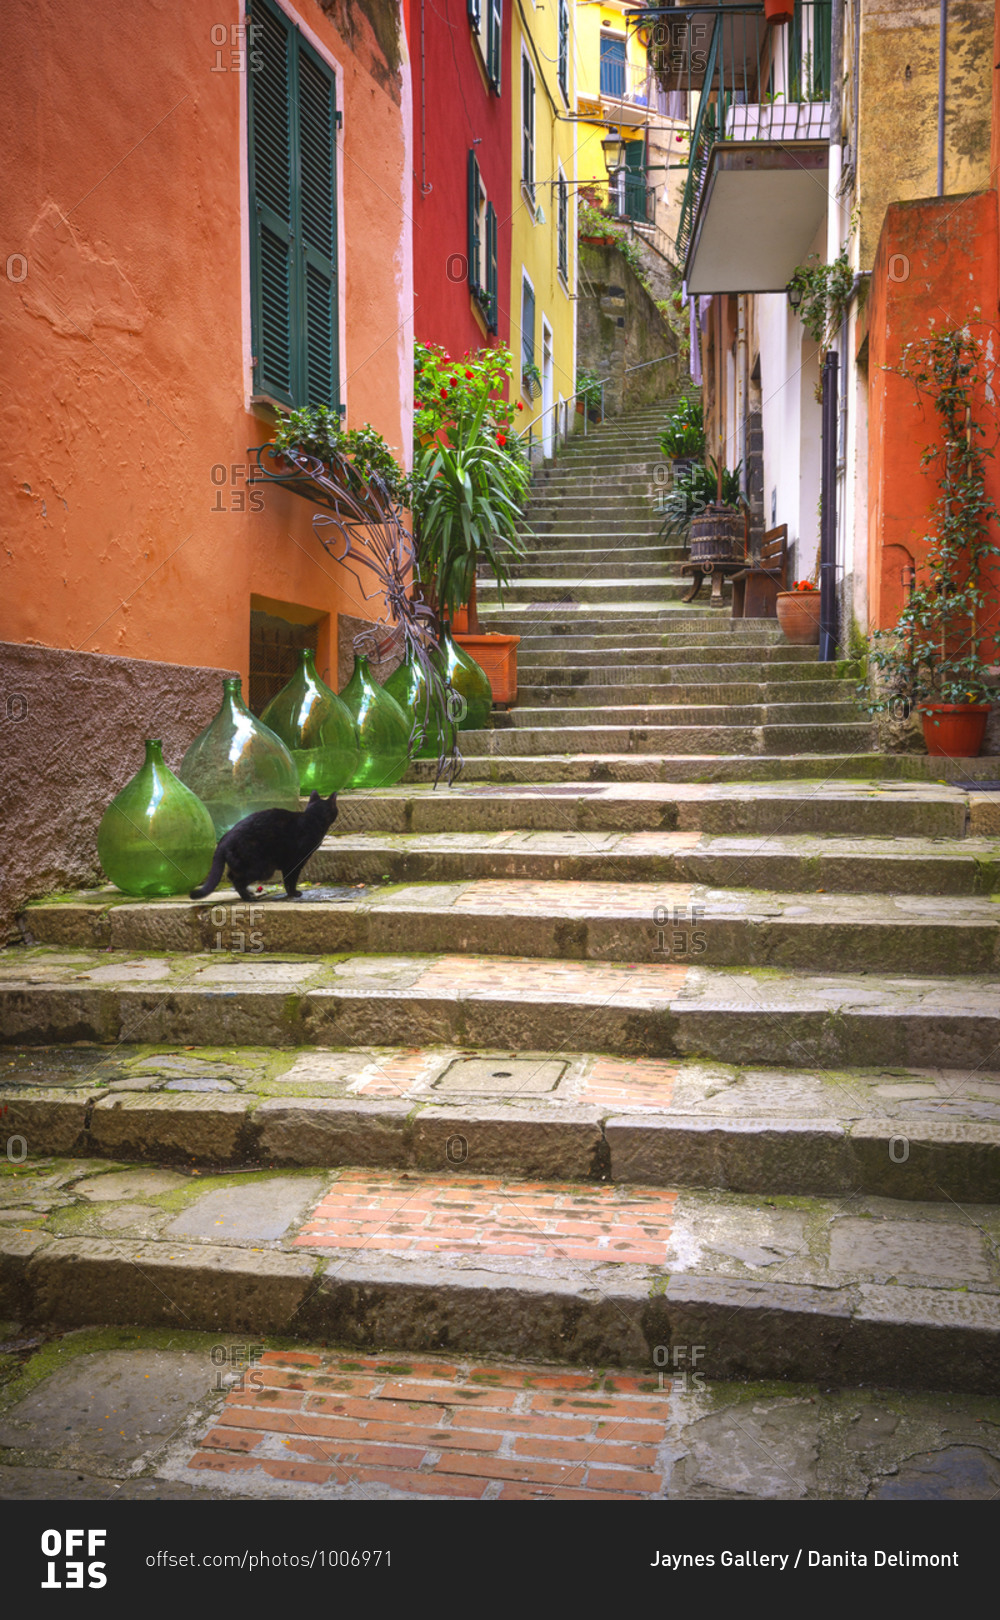 Europe, Italy, Monterosso. Cat on long stairway.